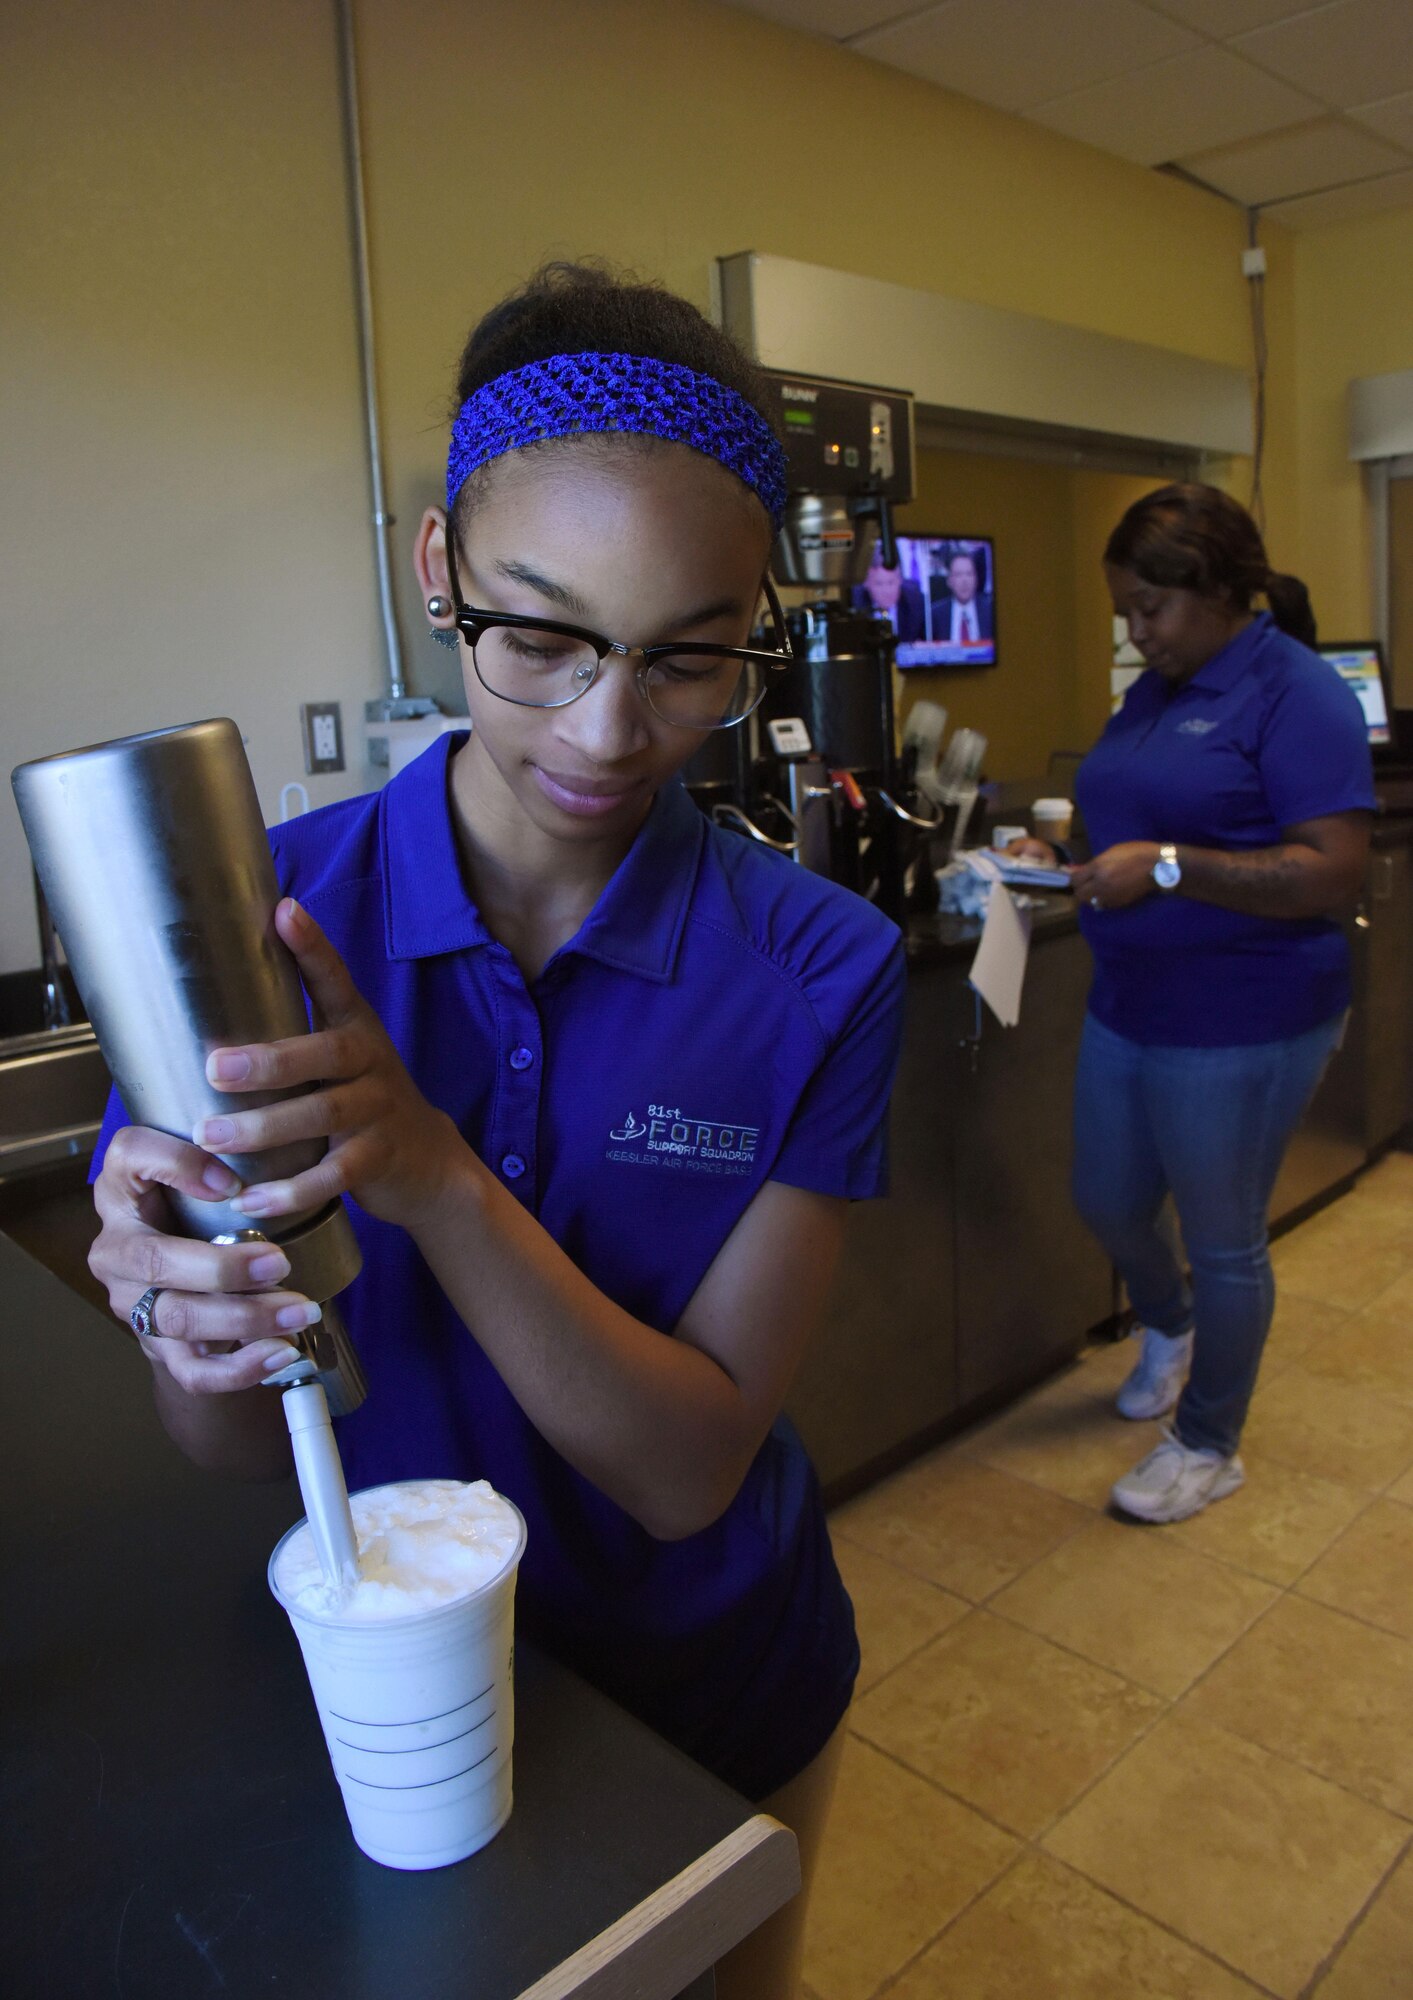 Quiana James and Teaunda Rodgers, 81st Force Support Squadron sales clerks, prepares orders at “It Is In The Cup” in the Bay Breeze Event Center June 8, 2017, on Keesler Air Force Base, Miss. Keesler's new coffee & smoothie bar will have its grand opening on June 29 at the Bay Breeze Event Center. The facility proudly serves Starbucks coffee, Frappuccino’s, iced beverages and espresso as well as Island Oasis smoothies in a variety of flavors. A full menu of items can be found at keesler81fss.us. (U.S. Air Force photo by Kemberly Groue)